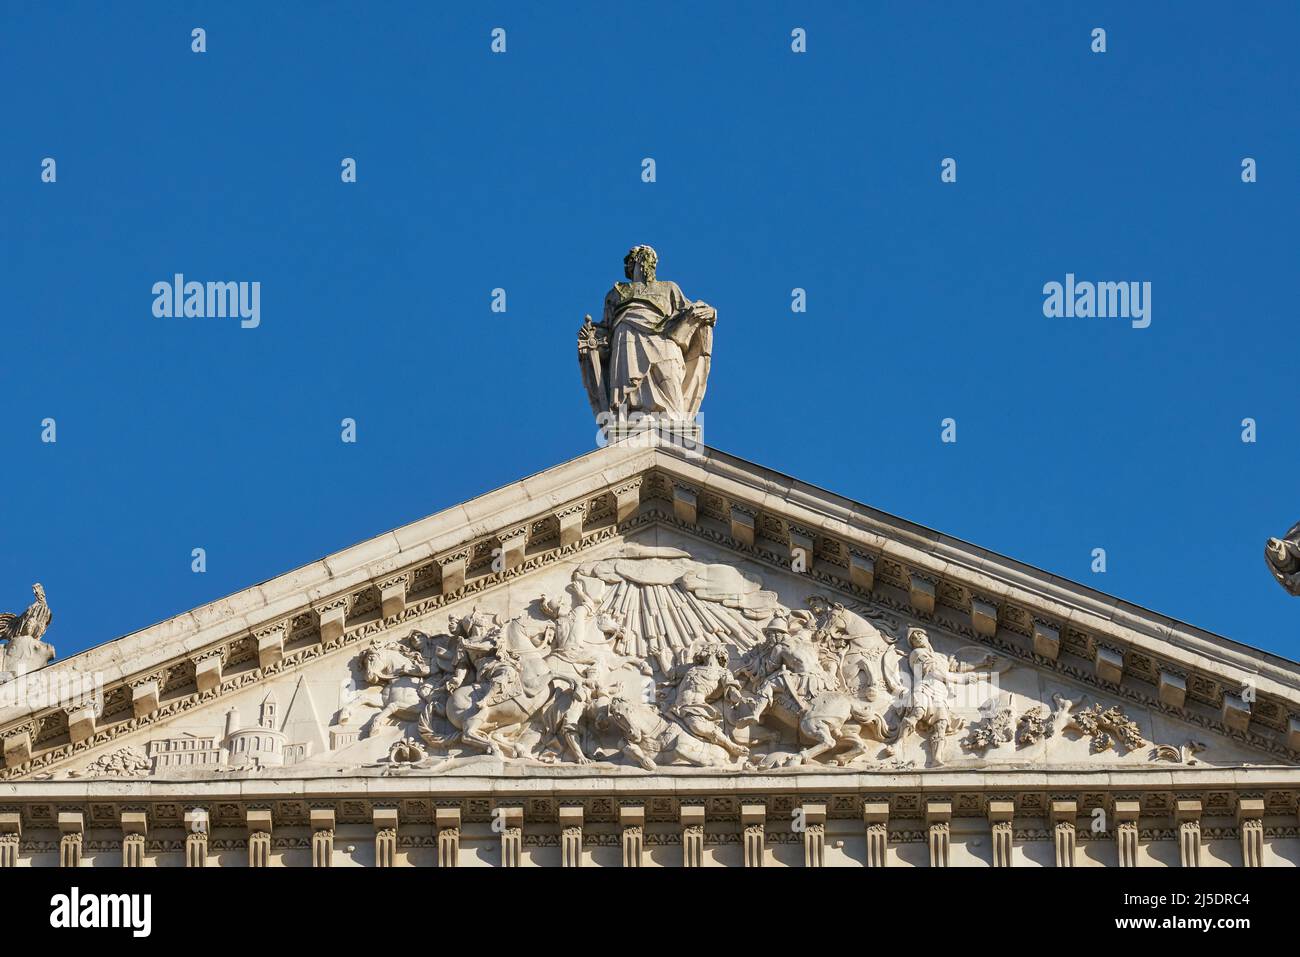 pediment statue of St Paul at St Paul's cathedral Stock Photo